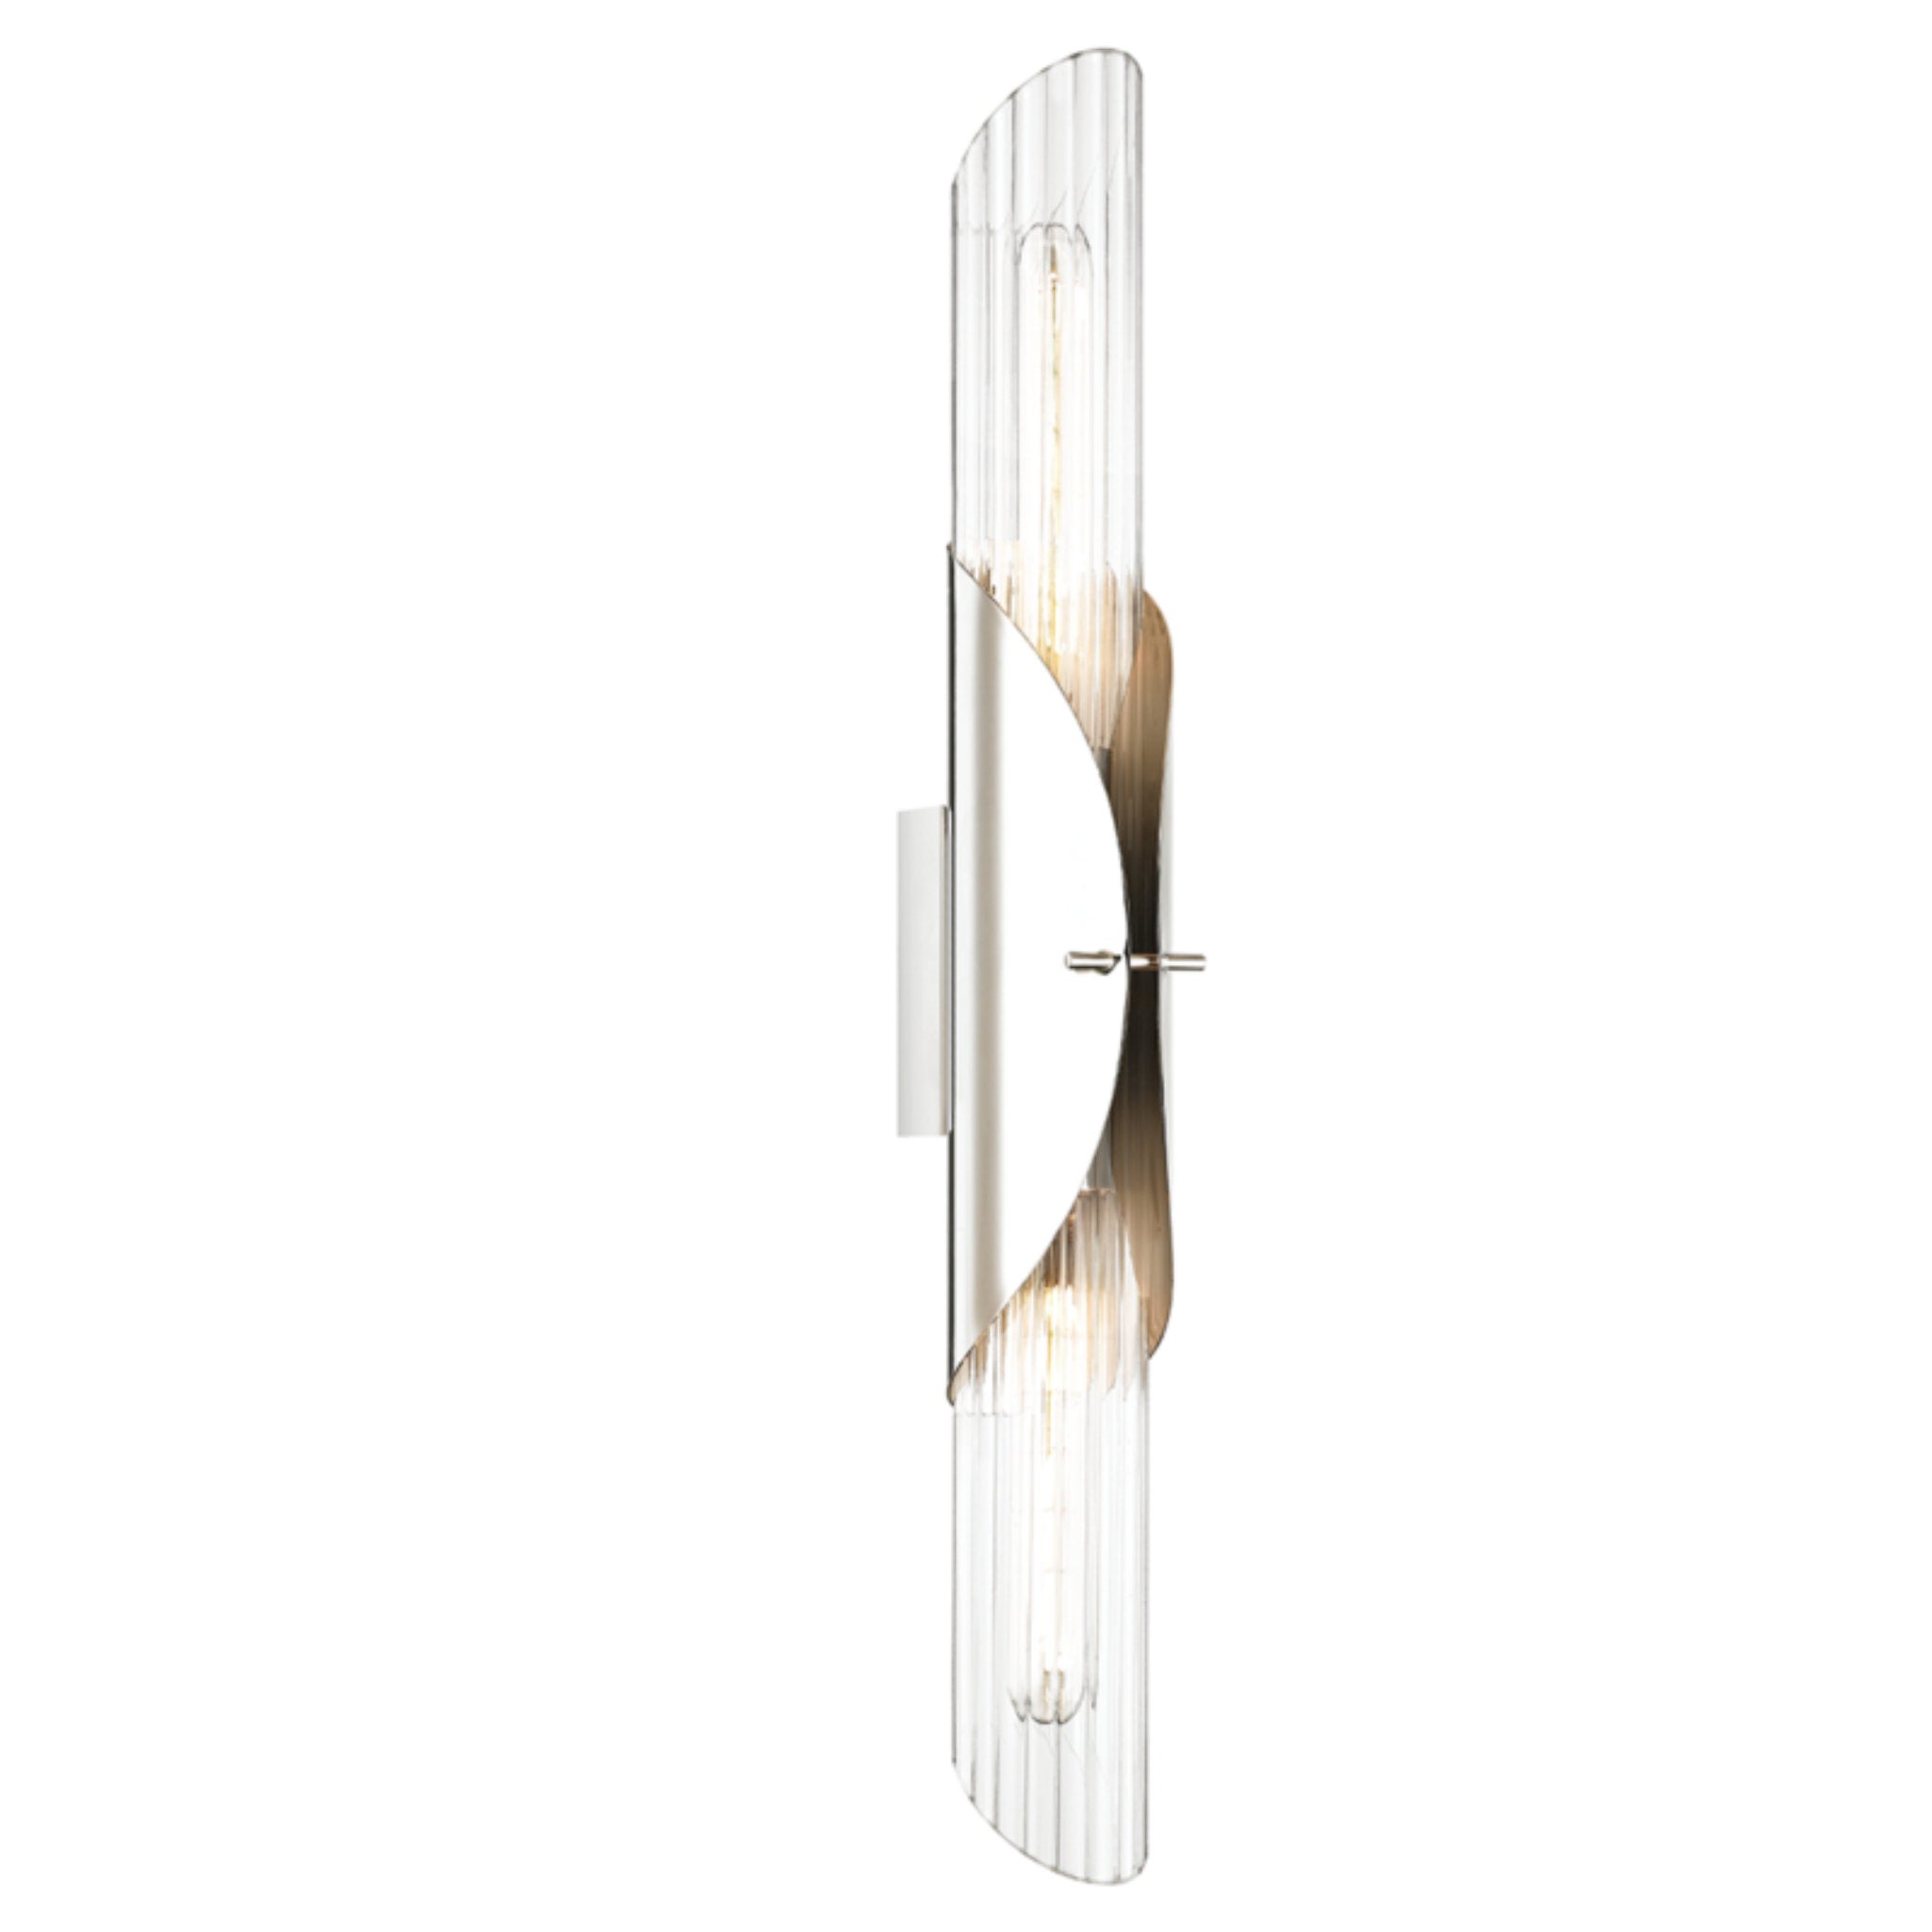 Lefferts 2 Light Wall Sconce in Polished Nickel